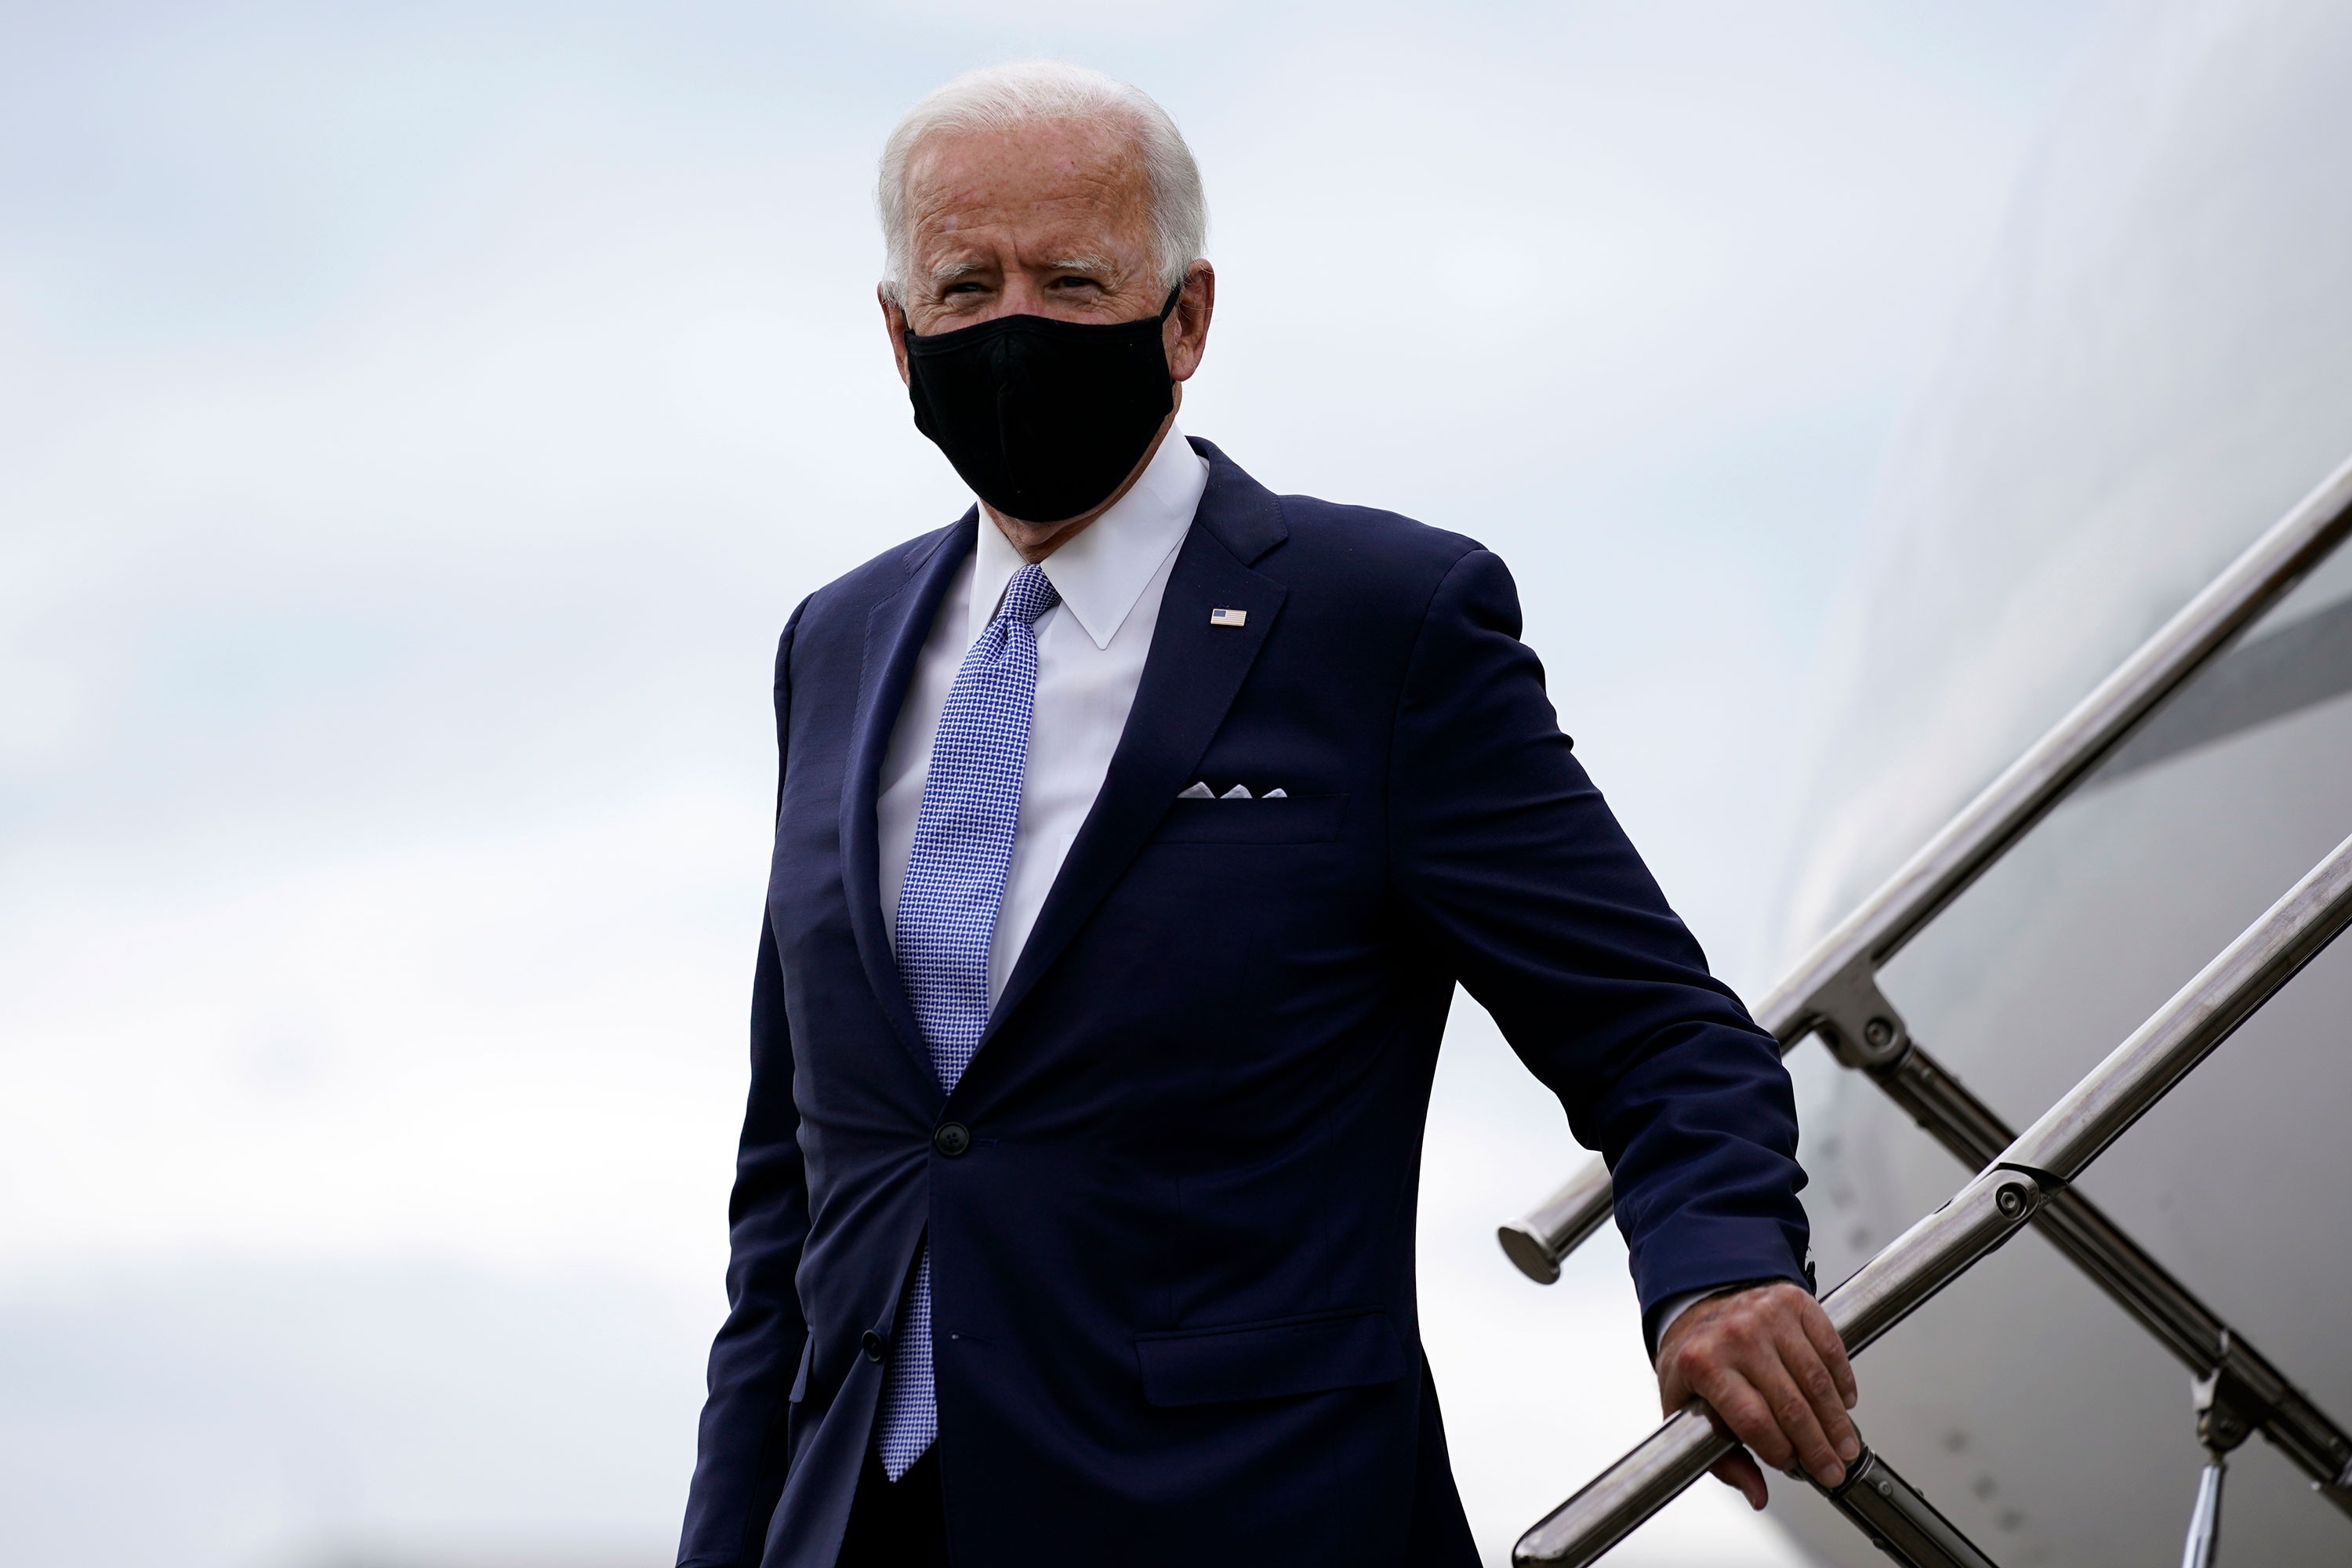 Democratic presidential candidate Joe Biden arrives at the Allegheny County Airport before speaking at a campaign event on August 31 in Pittsburgh, Pennsylvania.